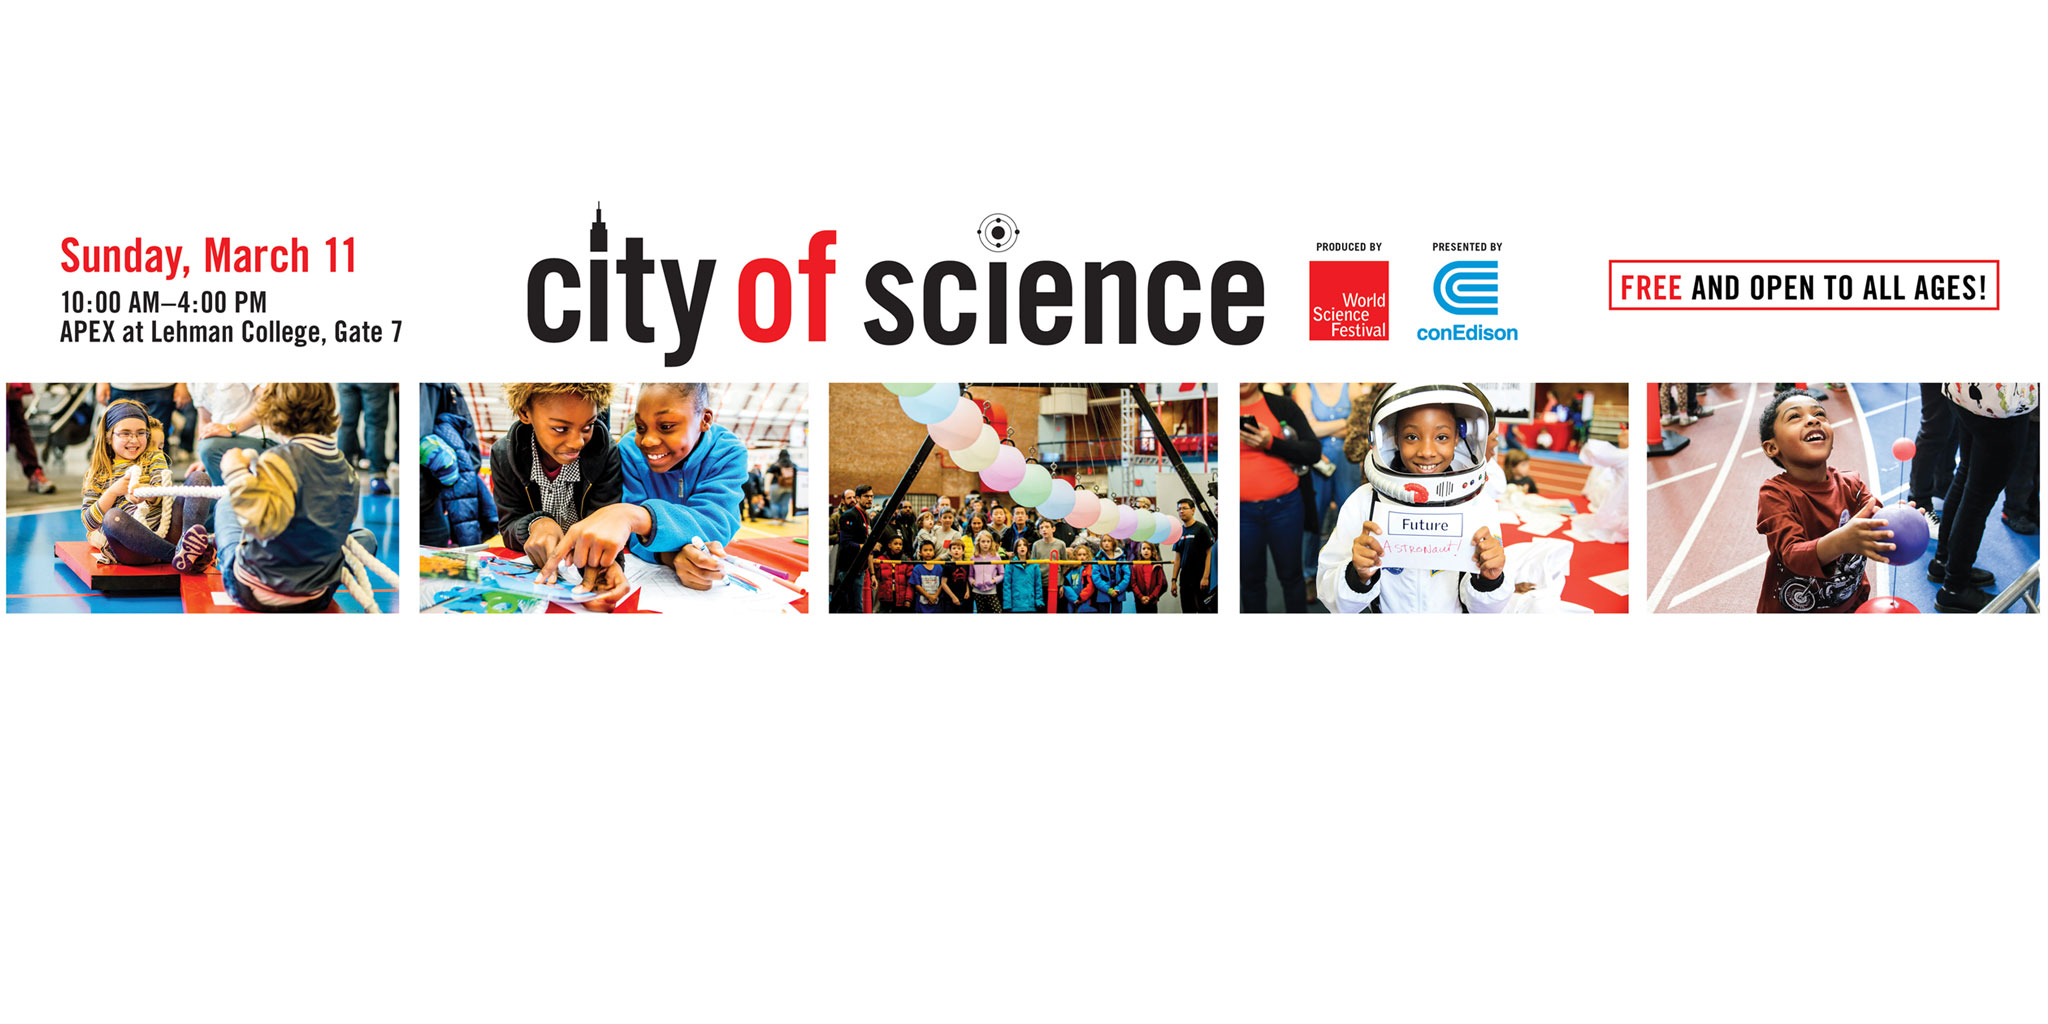 City of Science Returns to Lehman College on March 11